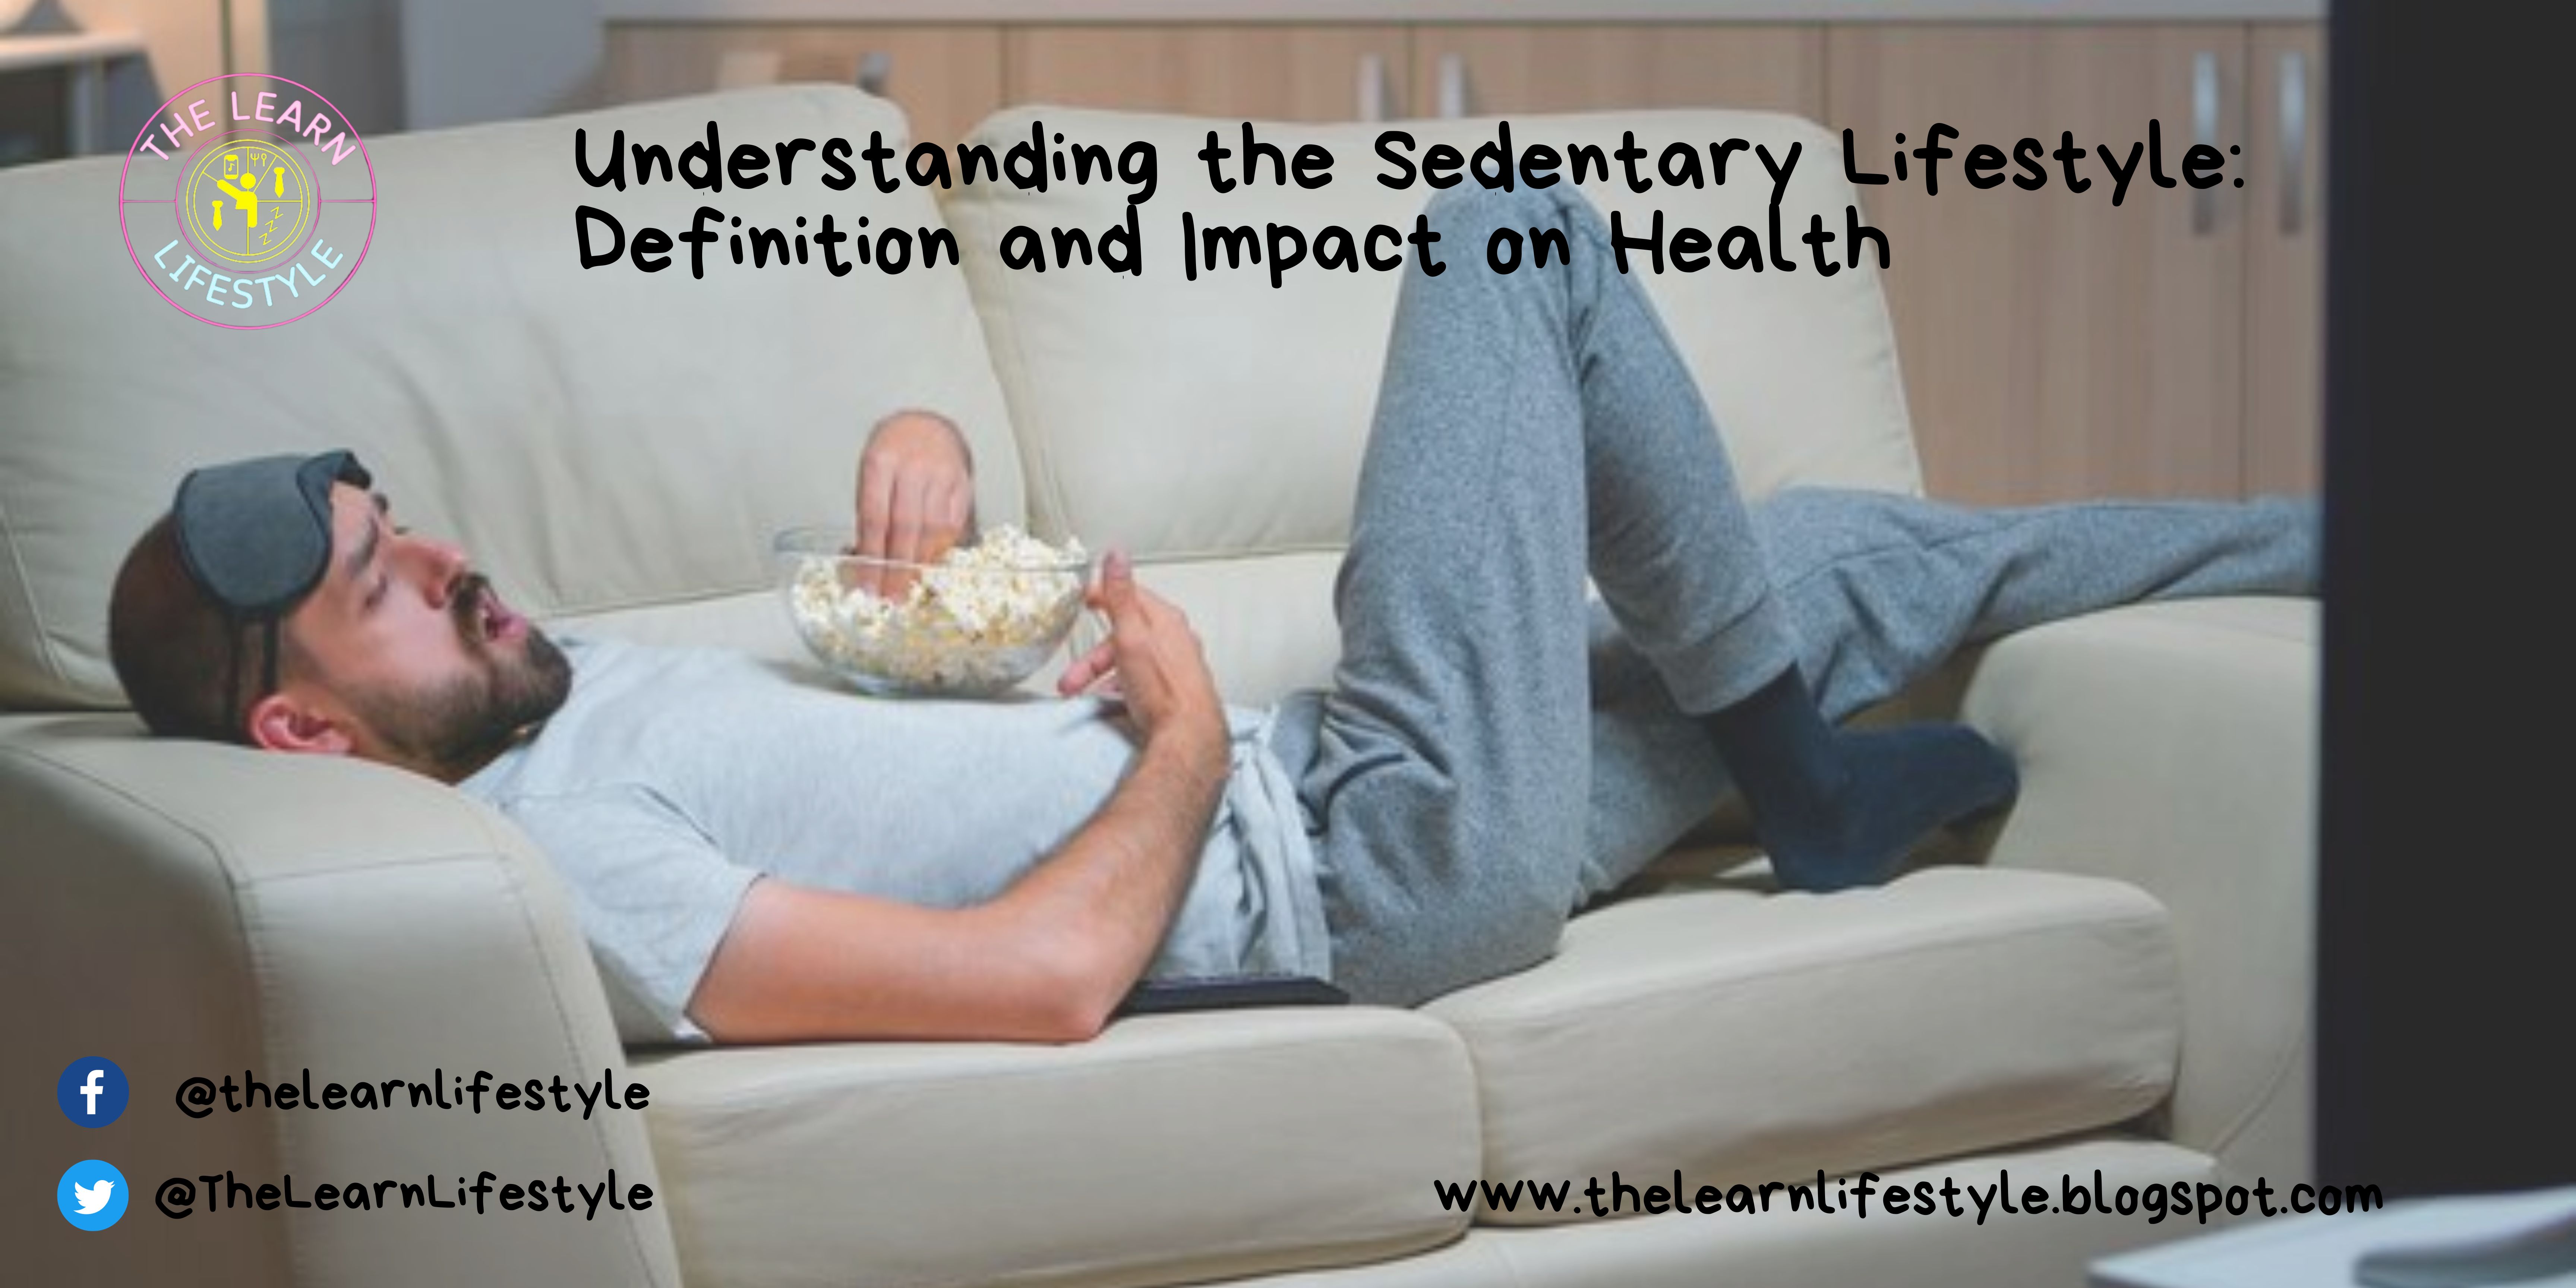  Understanding the Sedentary Lifestyle: Definition and Impact on Health